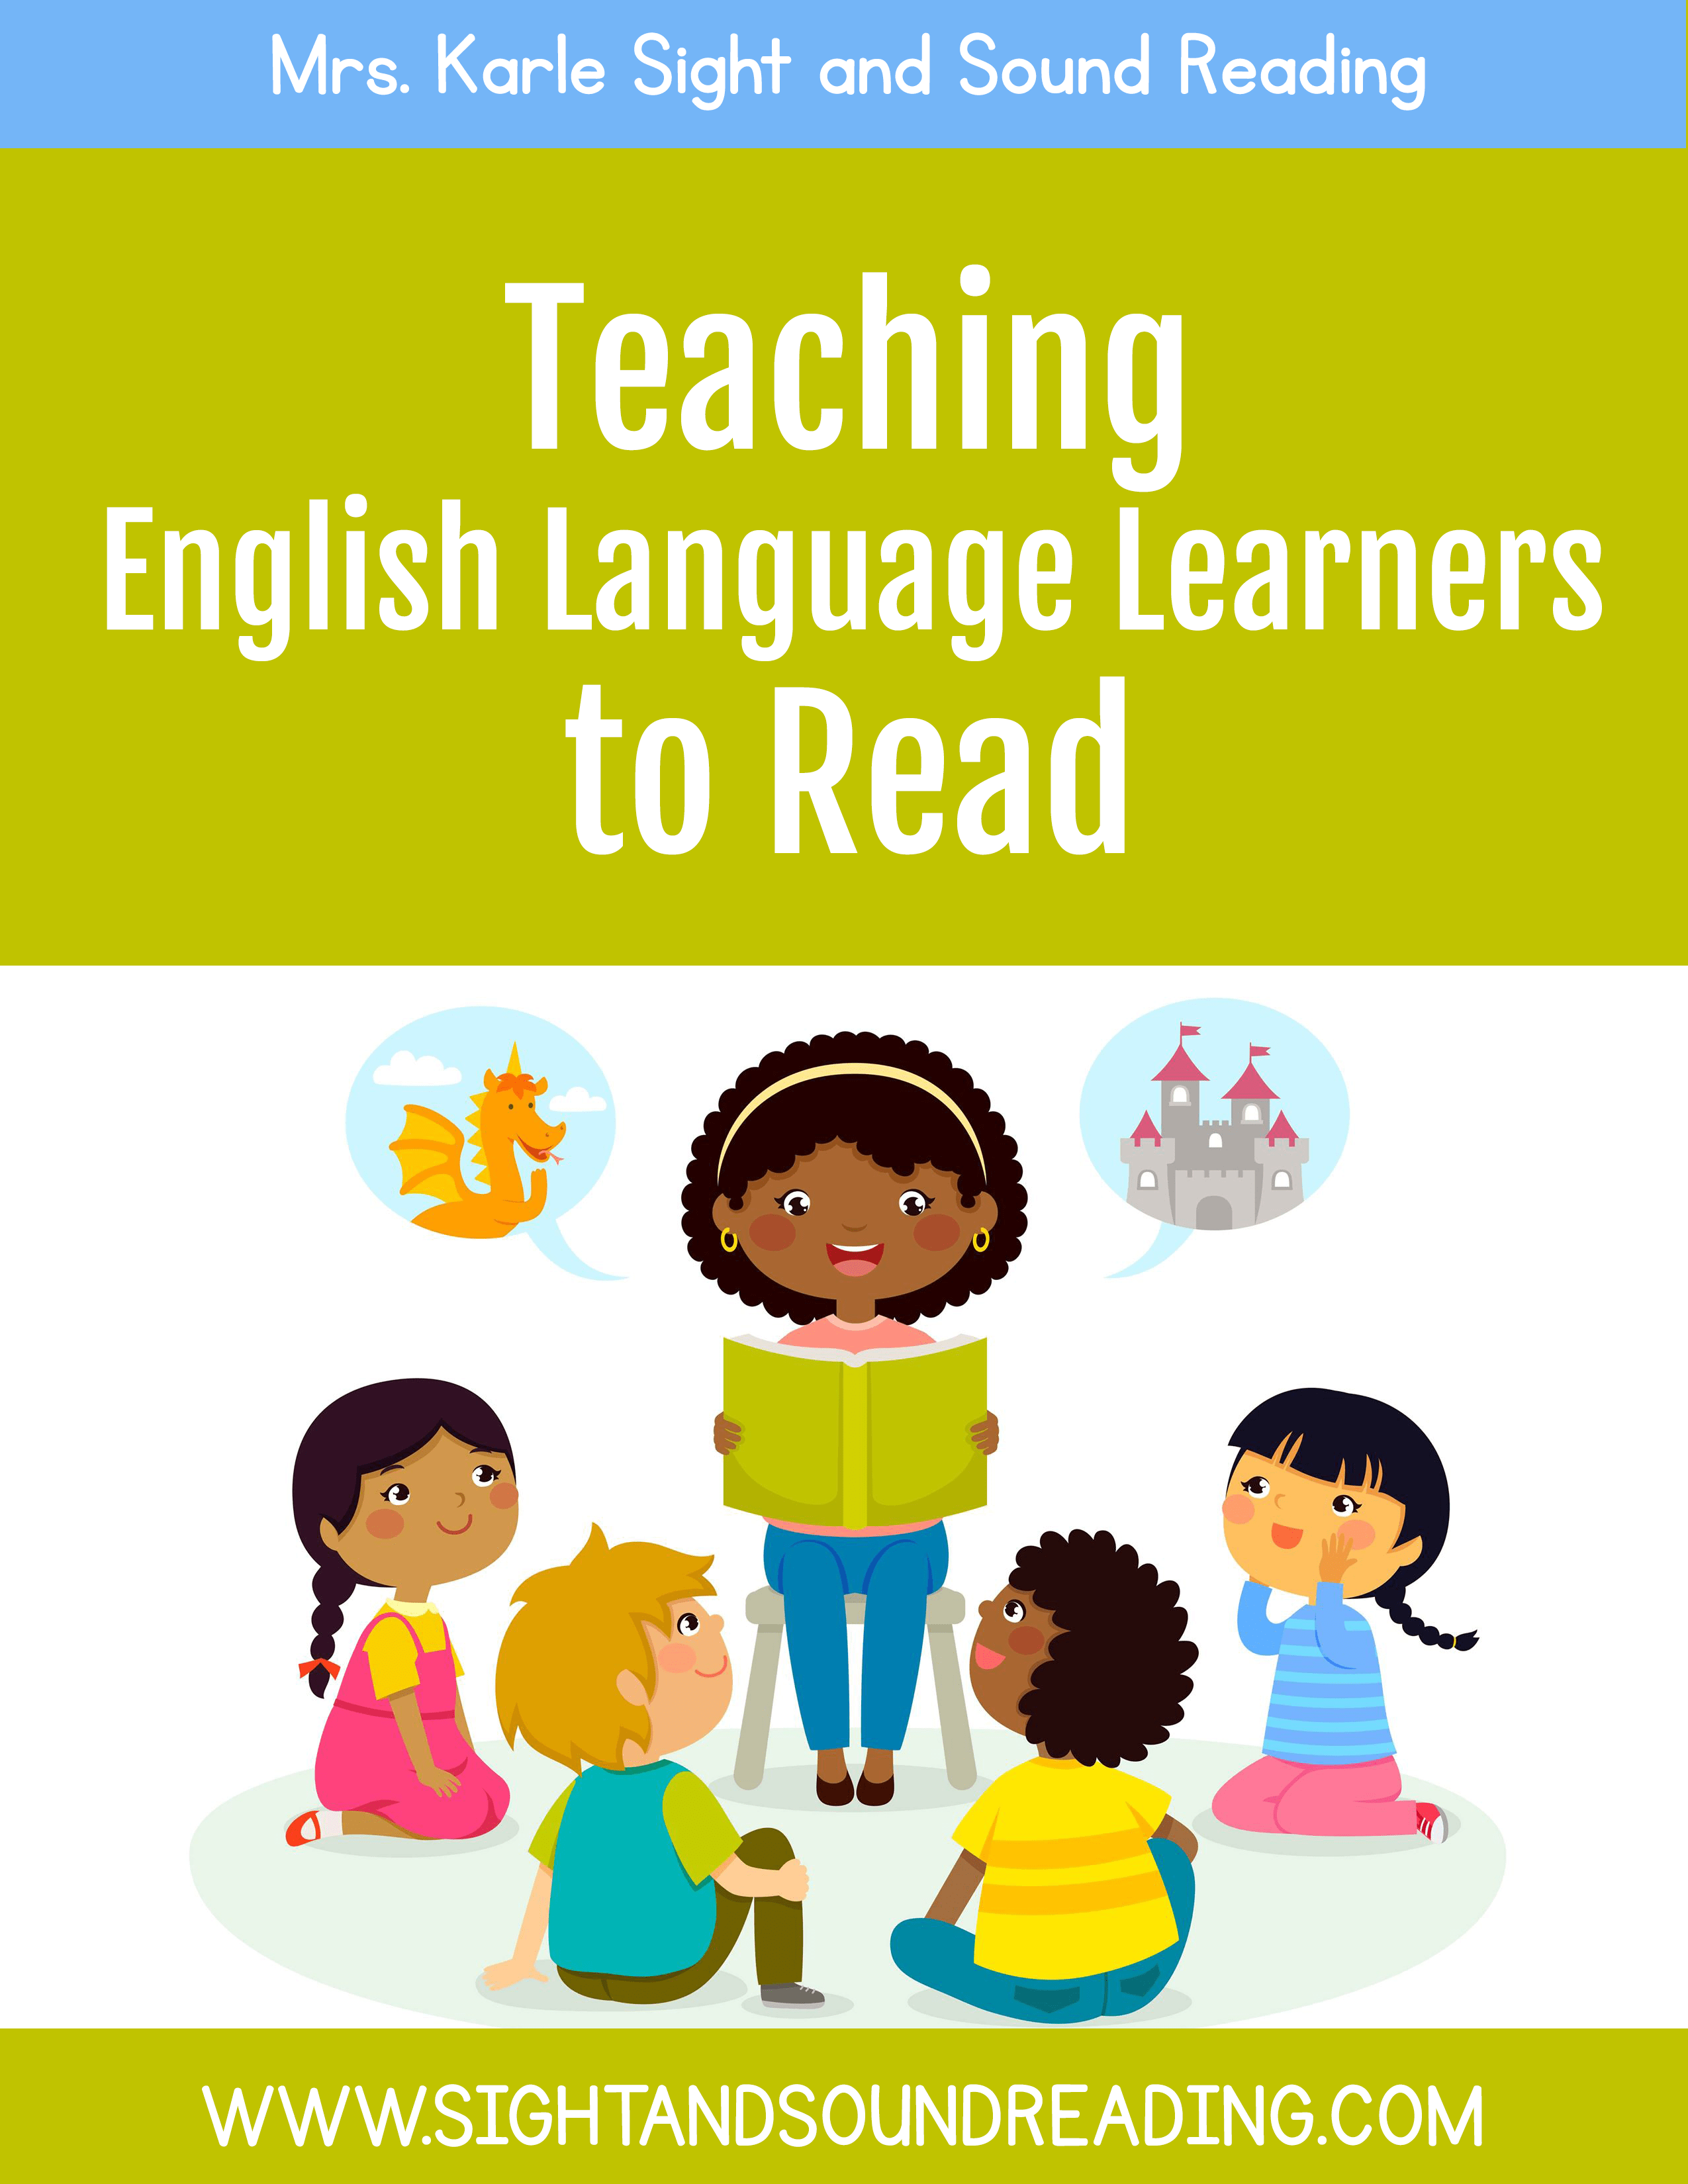 Teaching English as a Second Language to read